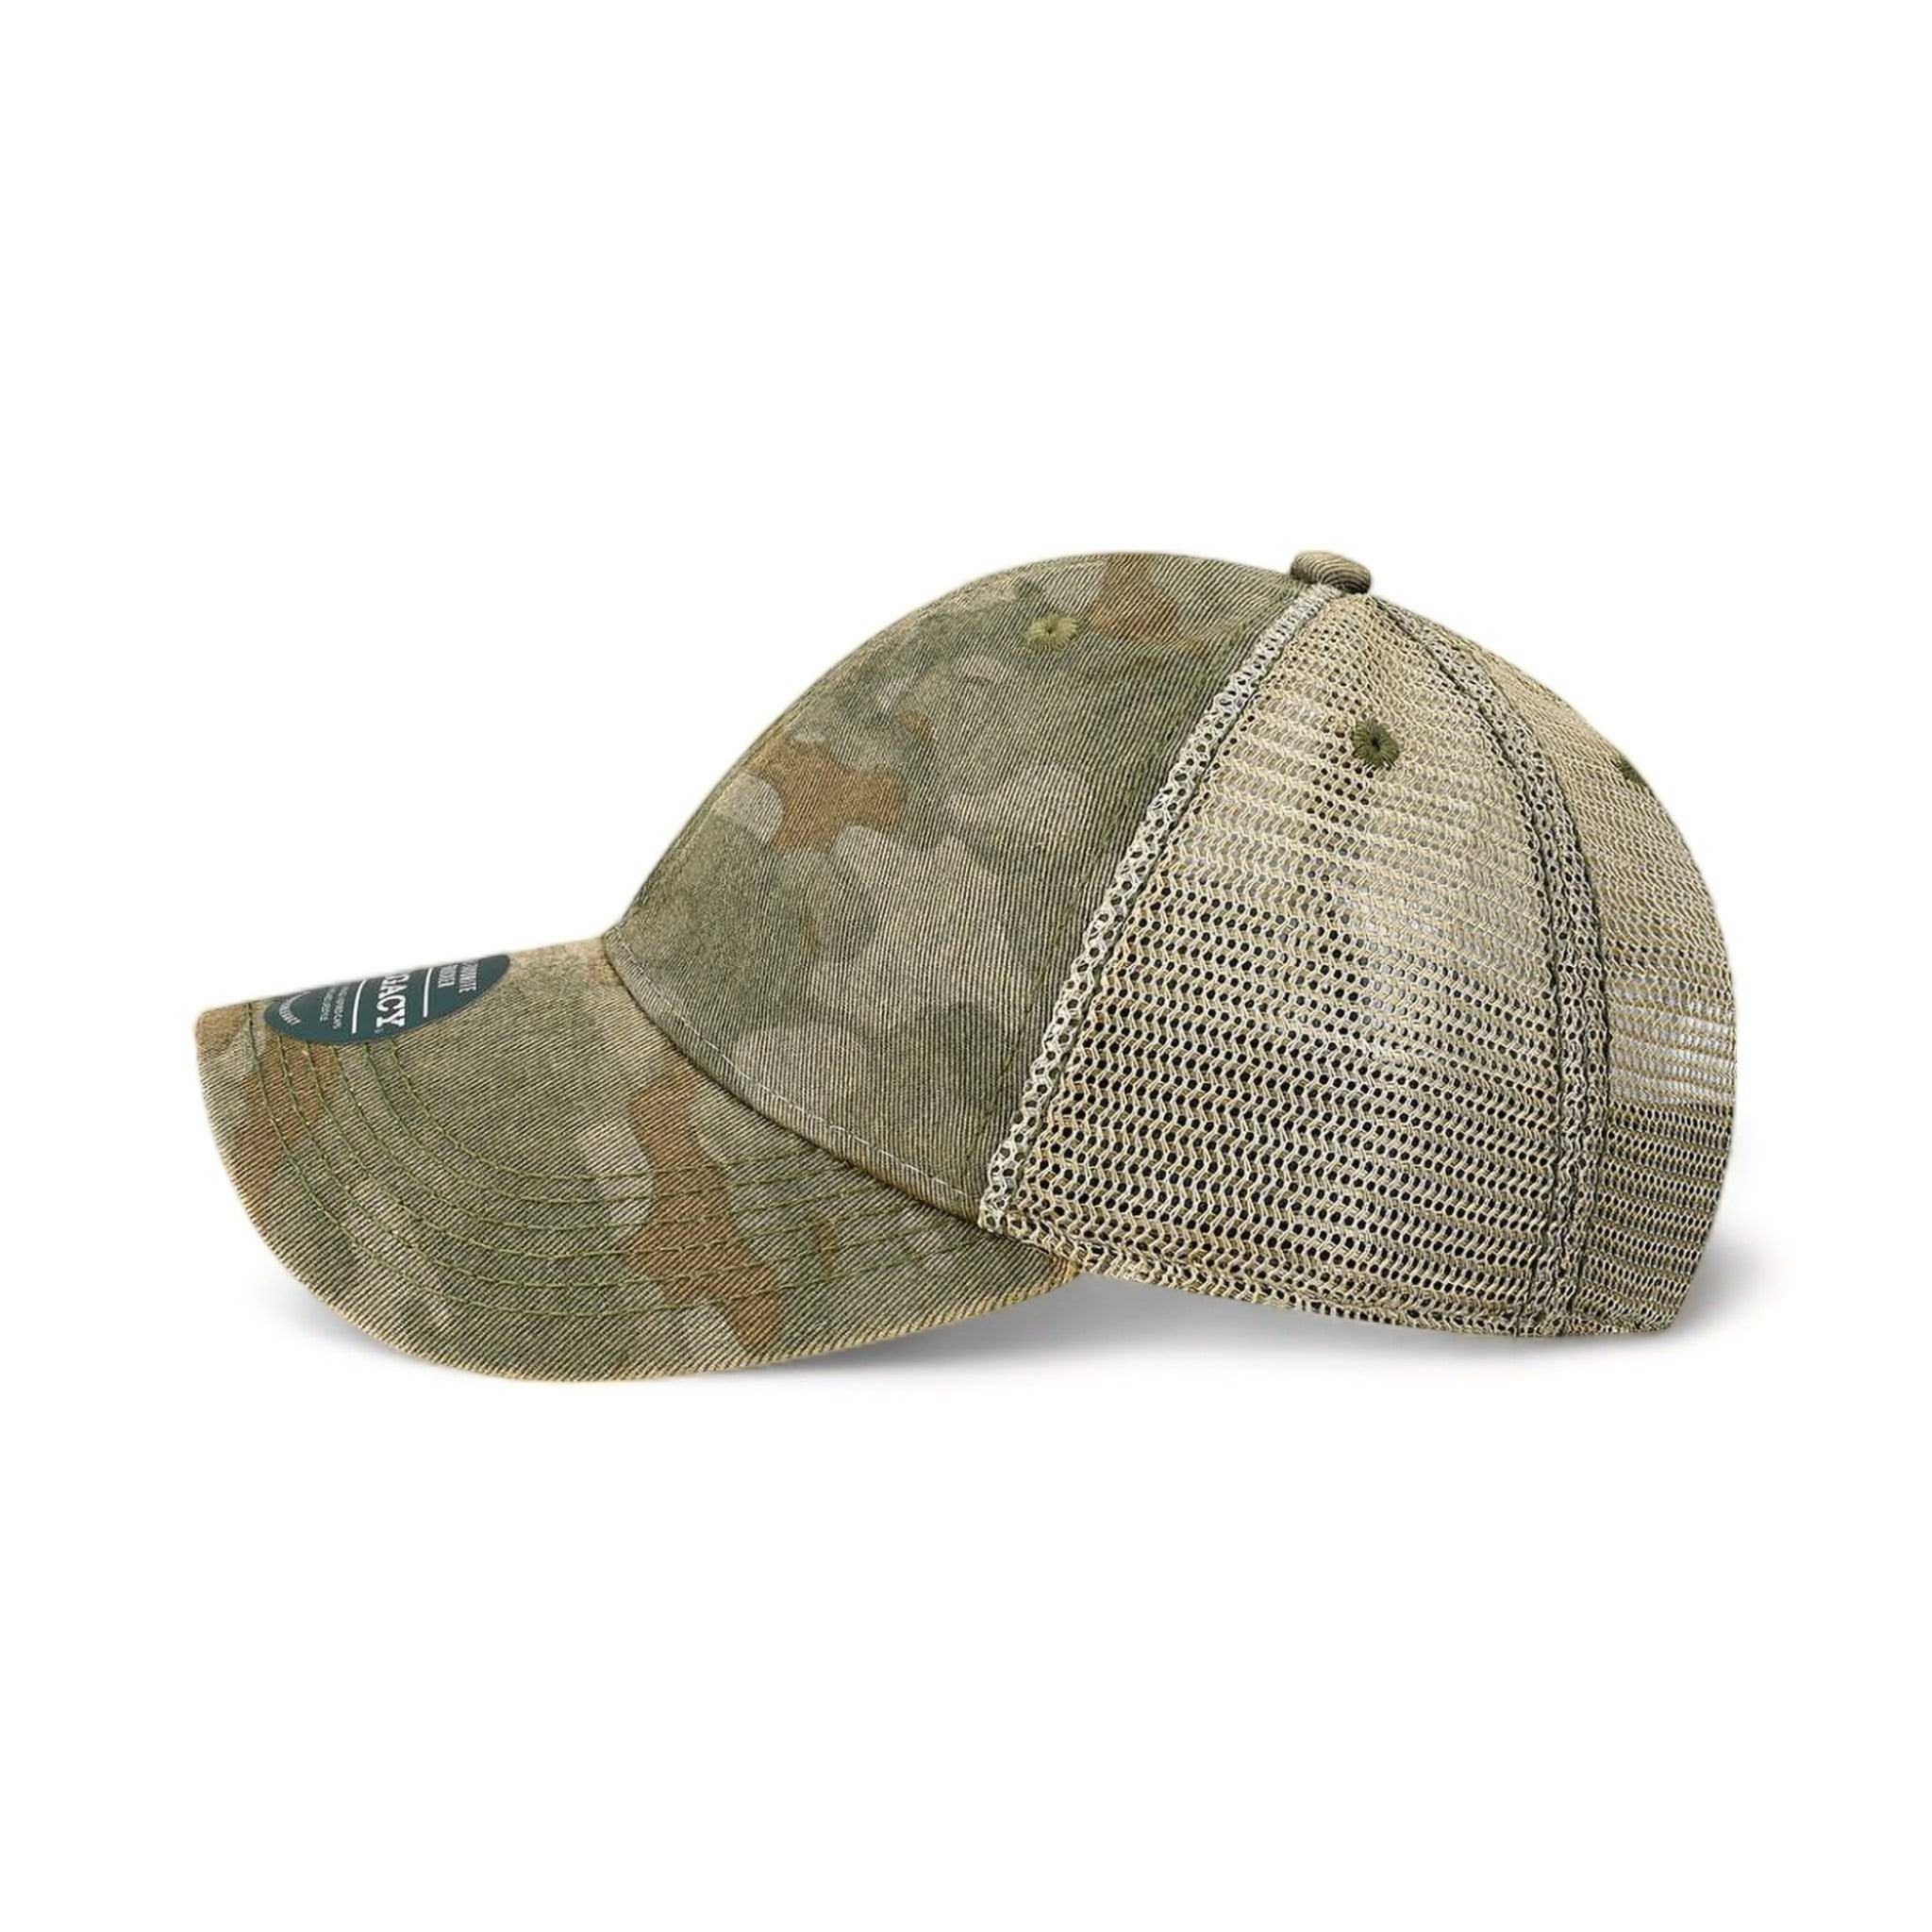 Side view of LEGACY OFA custom hat in green field camo and java